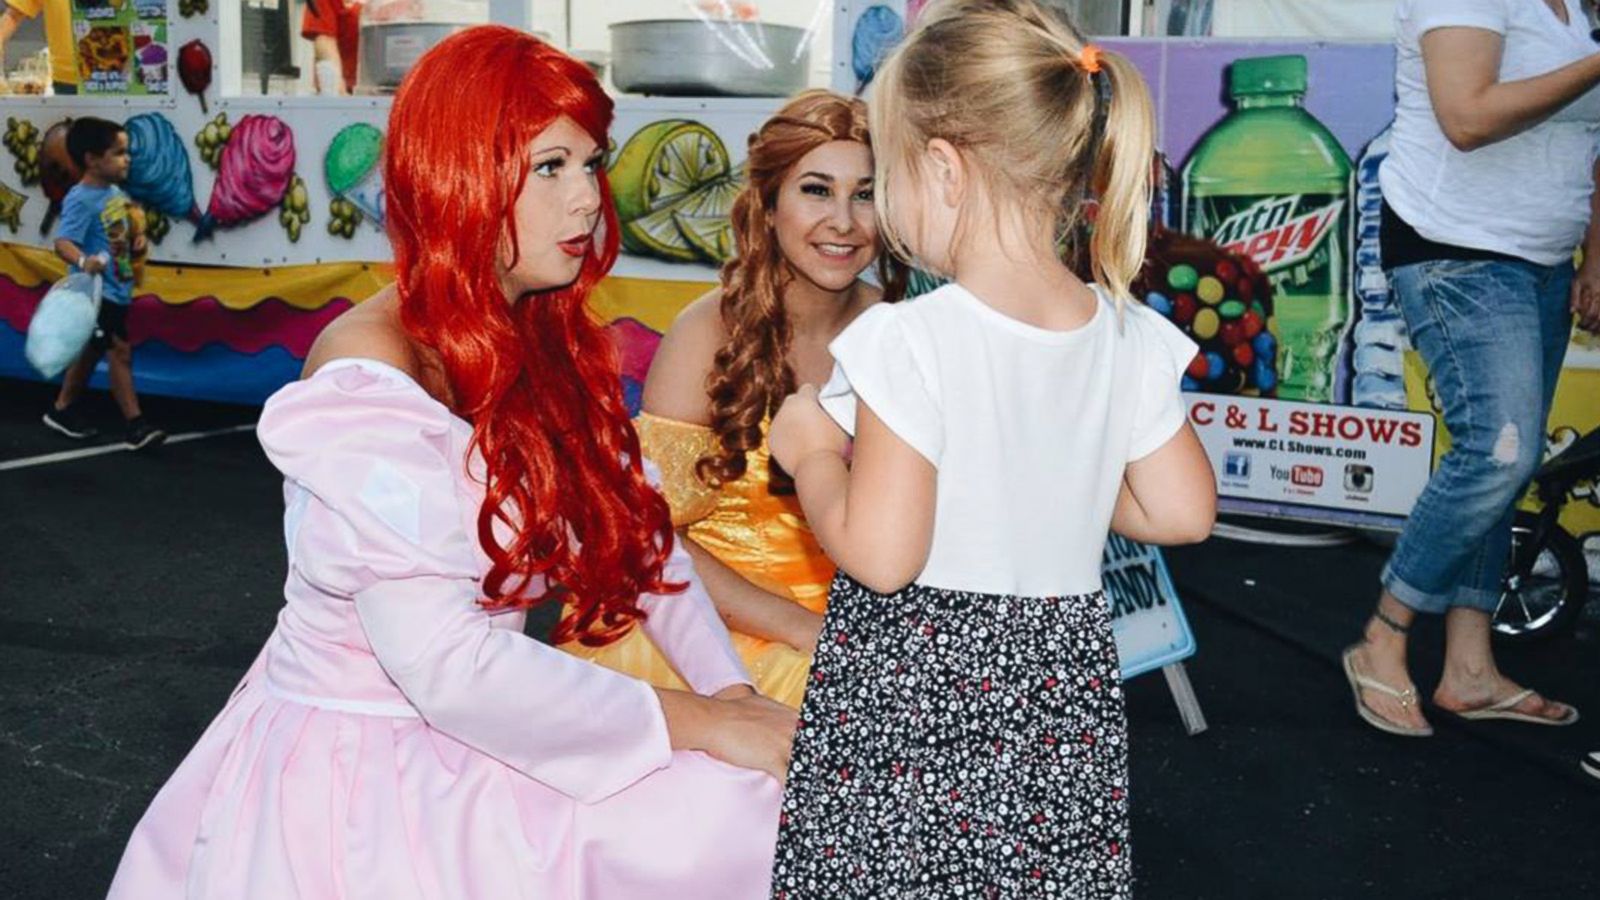 VIDEO: College students transform into princes and princesses to visit children in the hospital